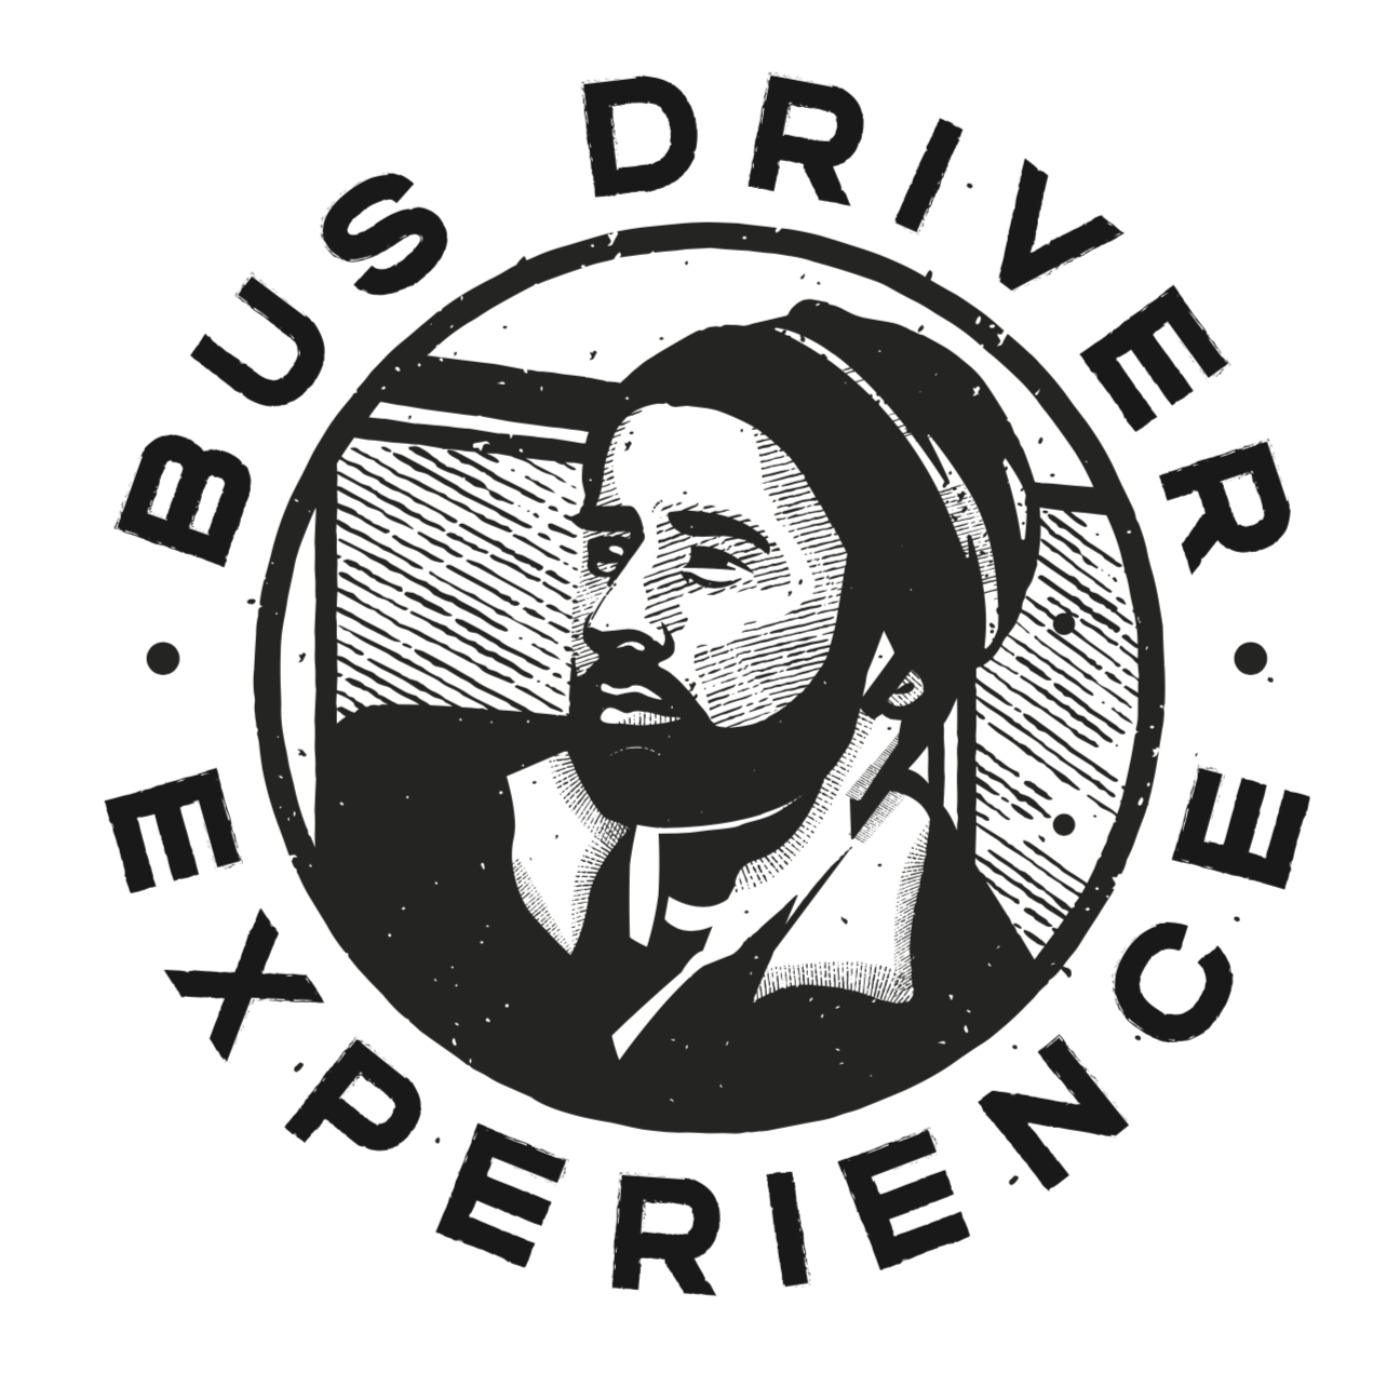 The Bus Driver Experience